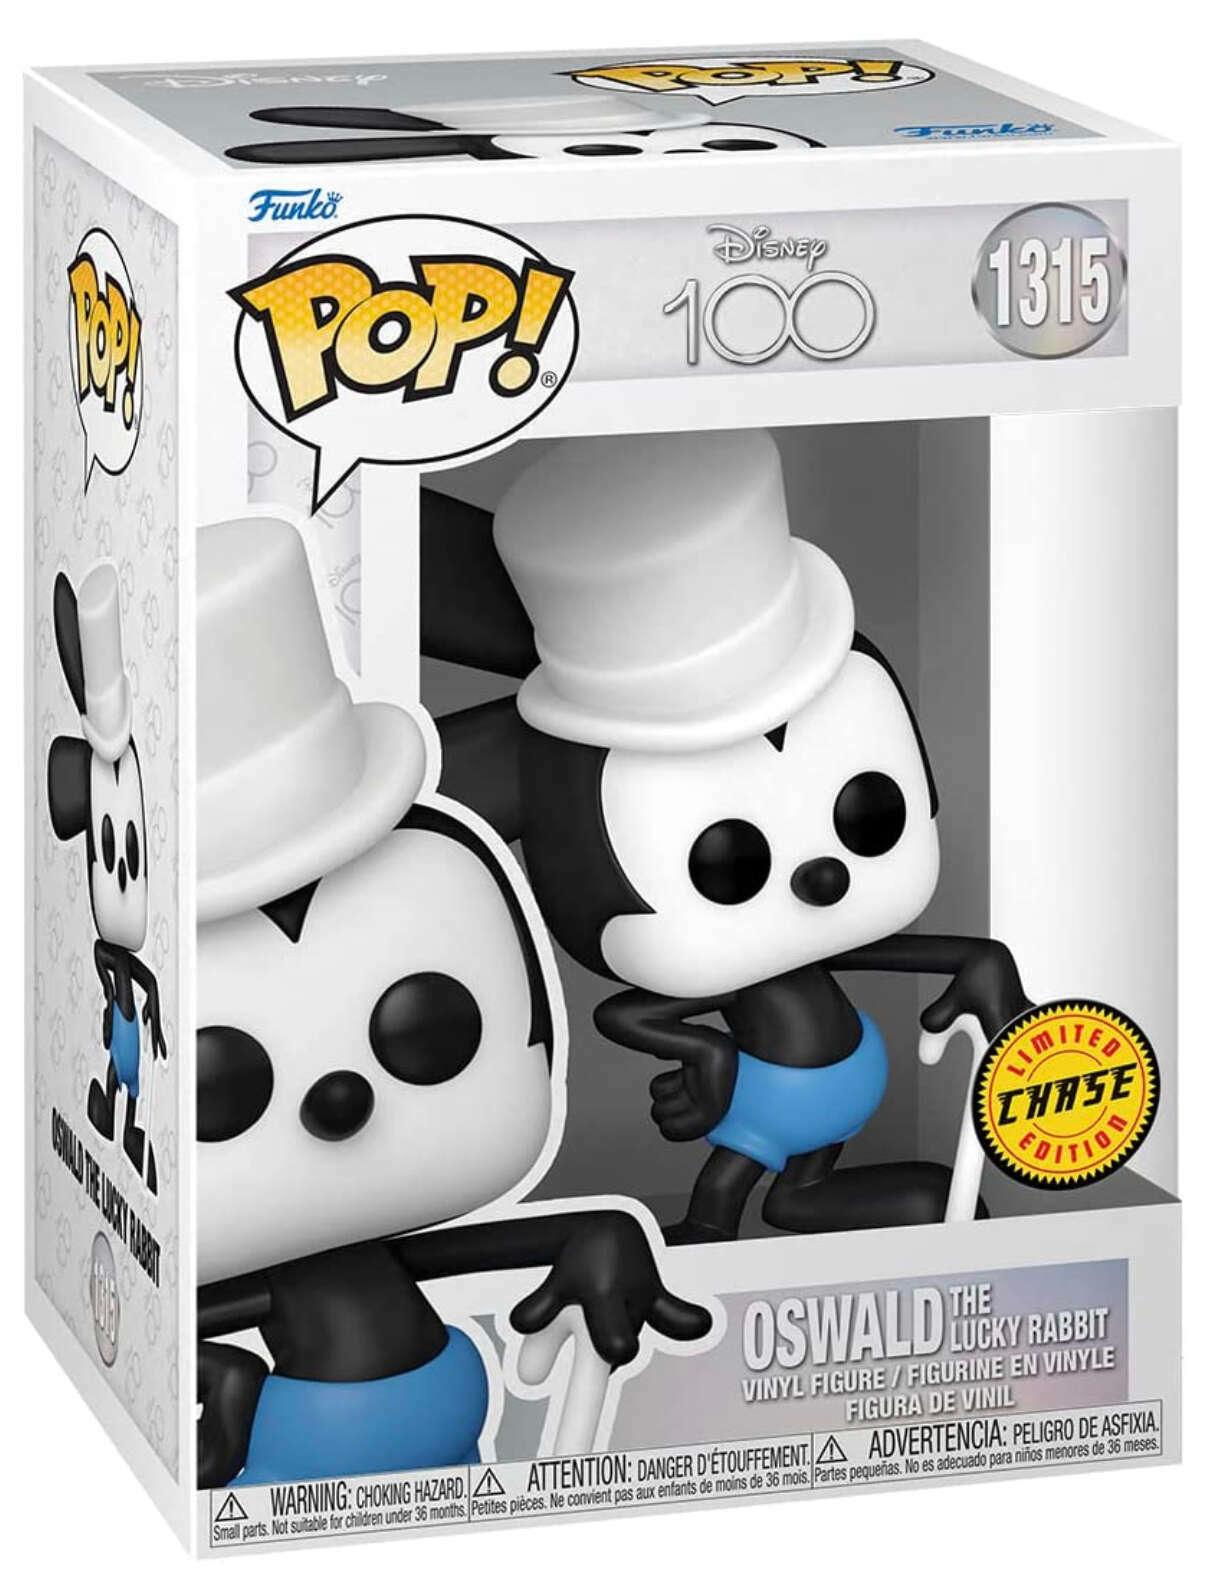 Pop! Disney - 100th Anniversary - Oswald The Lucky Rabbit - #1315 - Limited CHASE Edition - Hobby Champion Inc